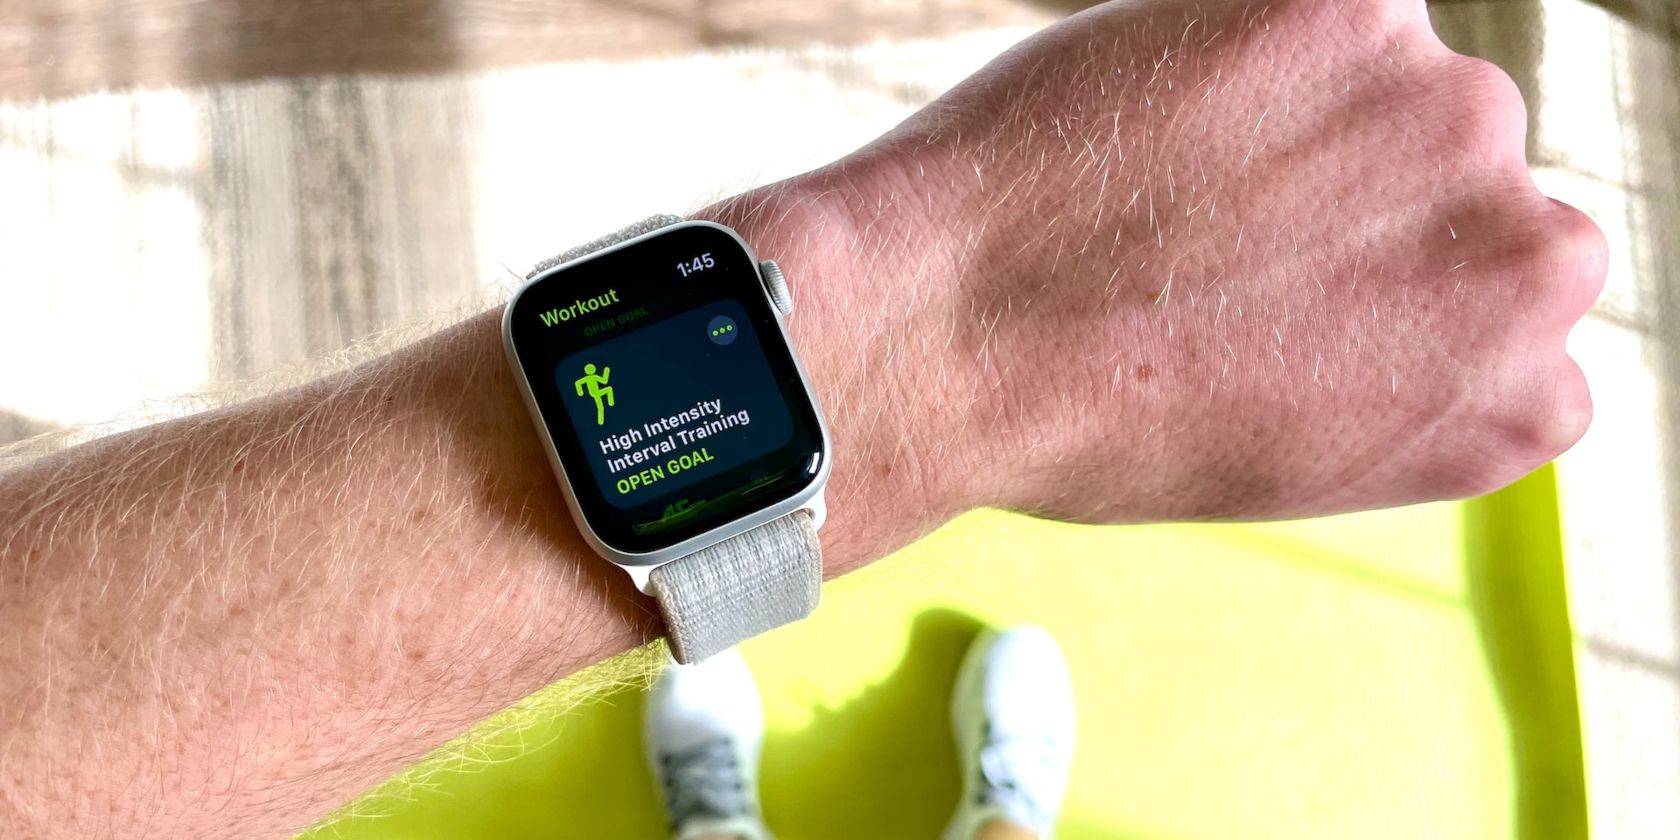 Fitness Watch User Preparing for a High Intensity Workout